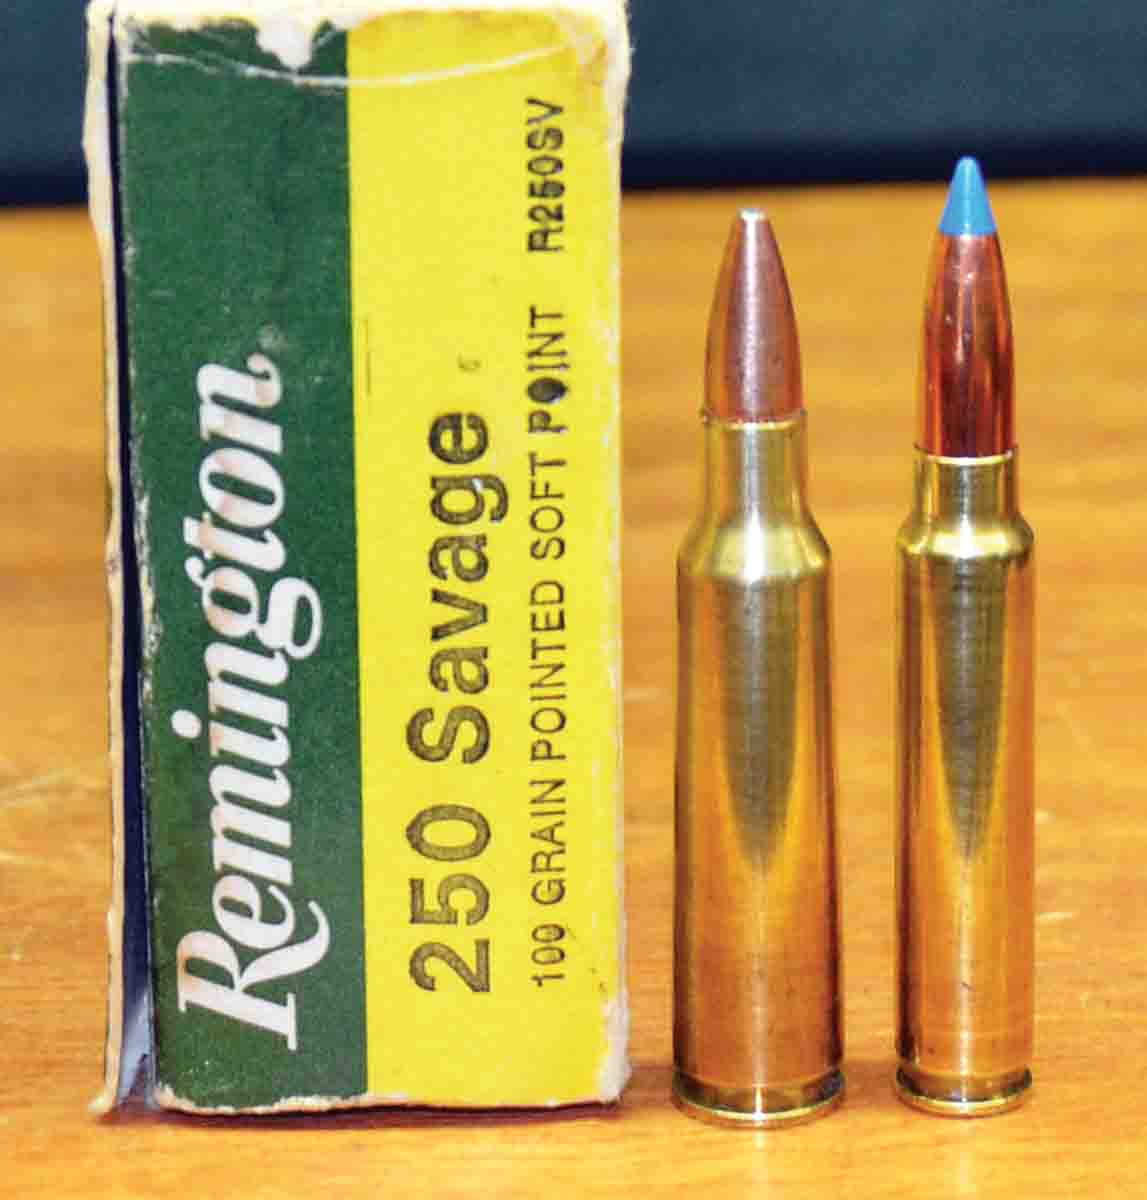 The 257 Kimber has less case capacity than the 250 Savage, but because it is loaded to higher pressures than most 250 Savage factory ammunition, velocities are about the same. Cartridges are the 250 Savage (left) and the 257 Kimber (right).